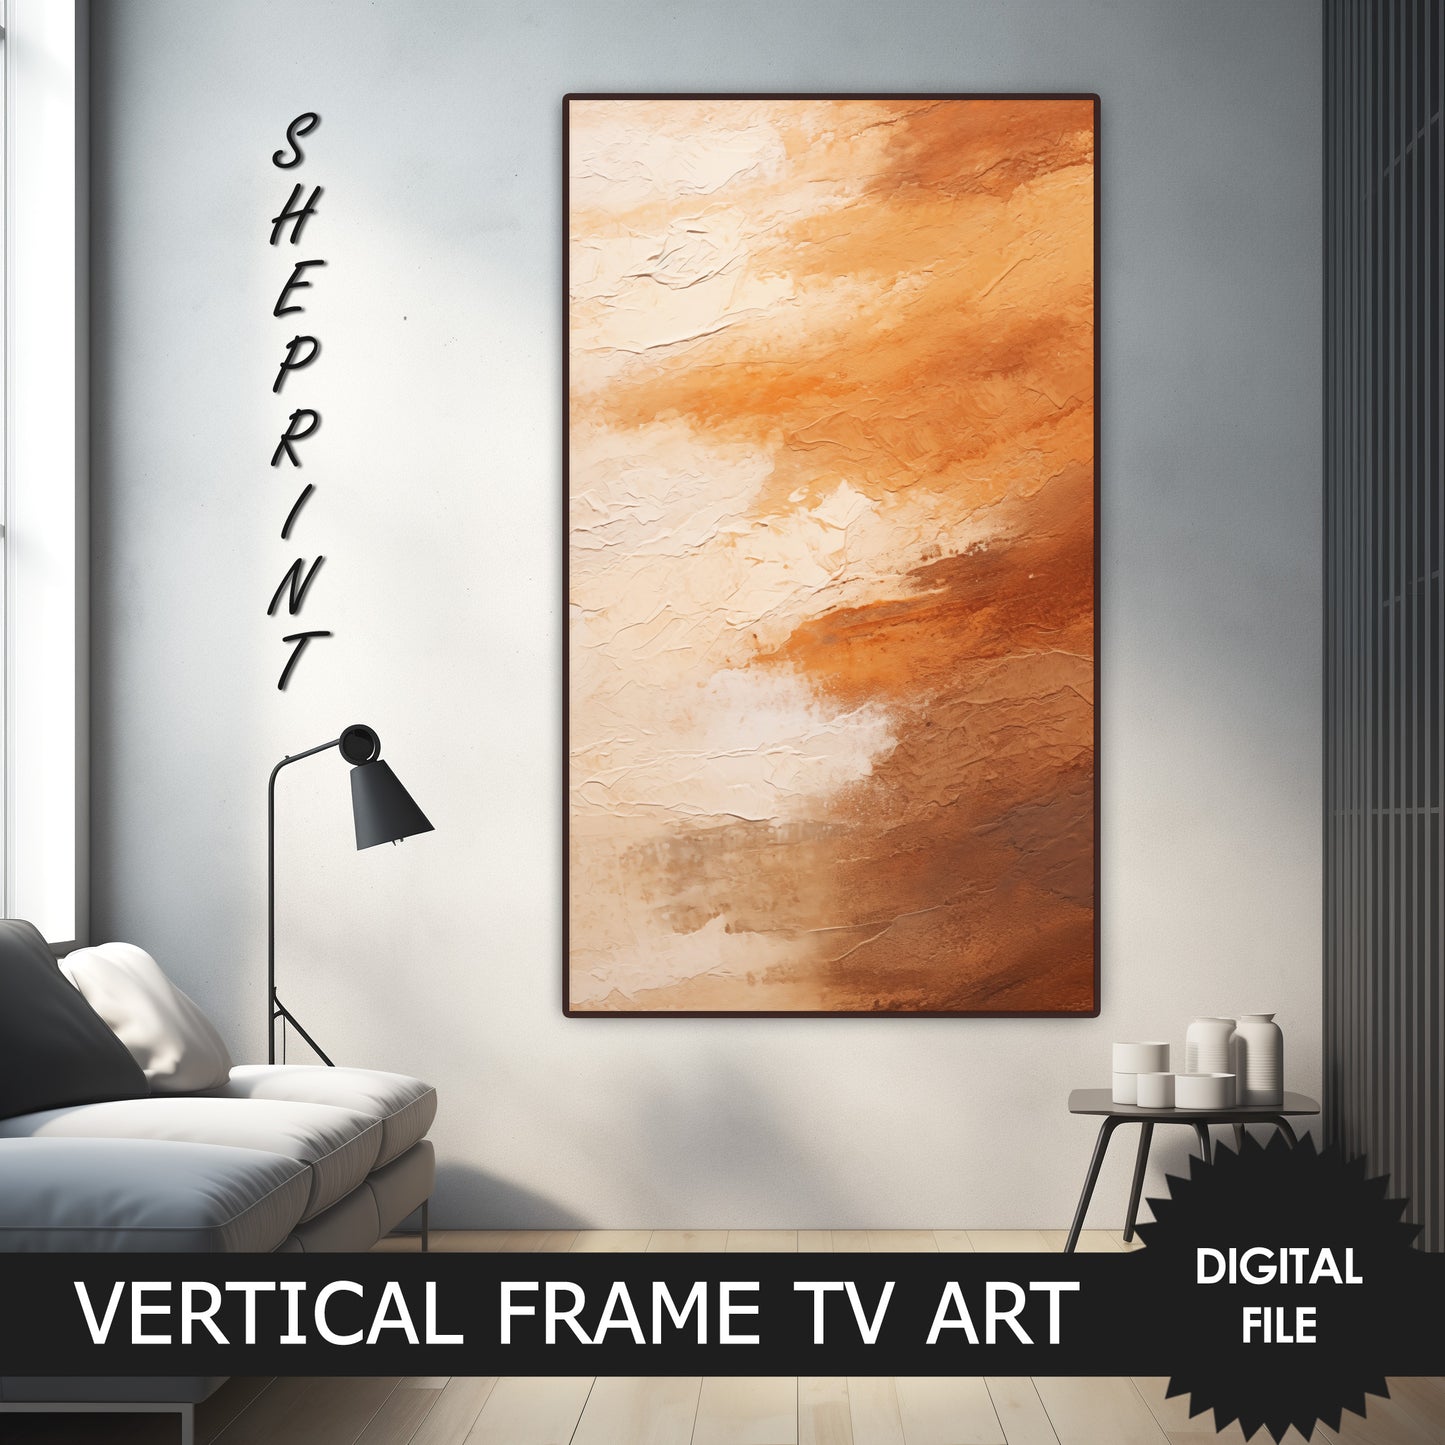 Vertical Frame TV Art, Earthy Tones Strokes Abstract Art, Neutral Colors, Oil Painting, preview on samsung frame tv when mounted vertically